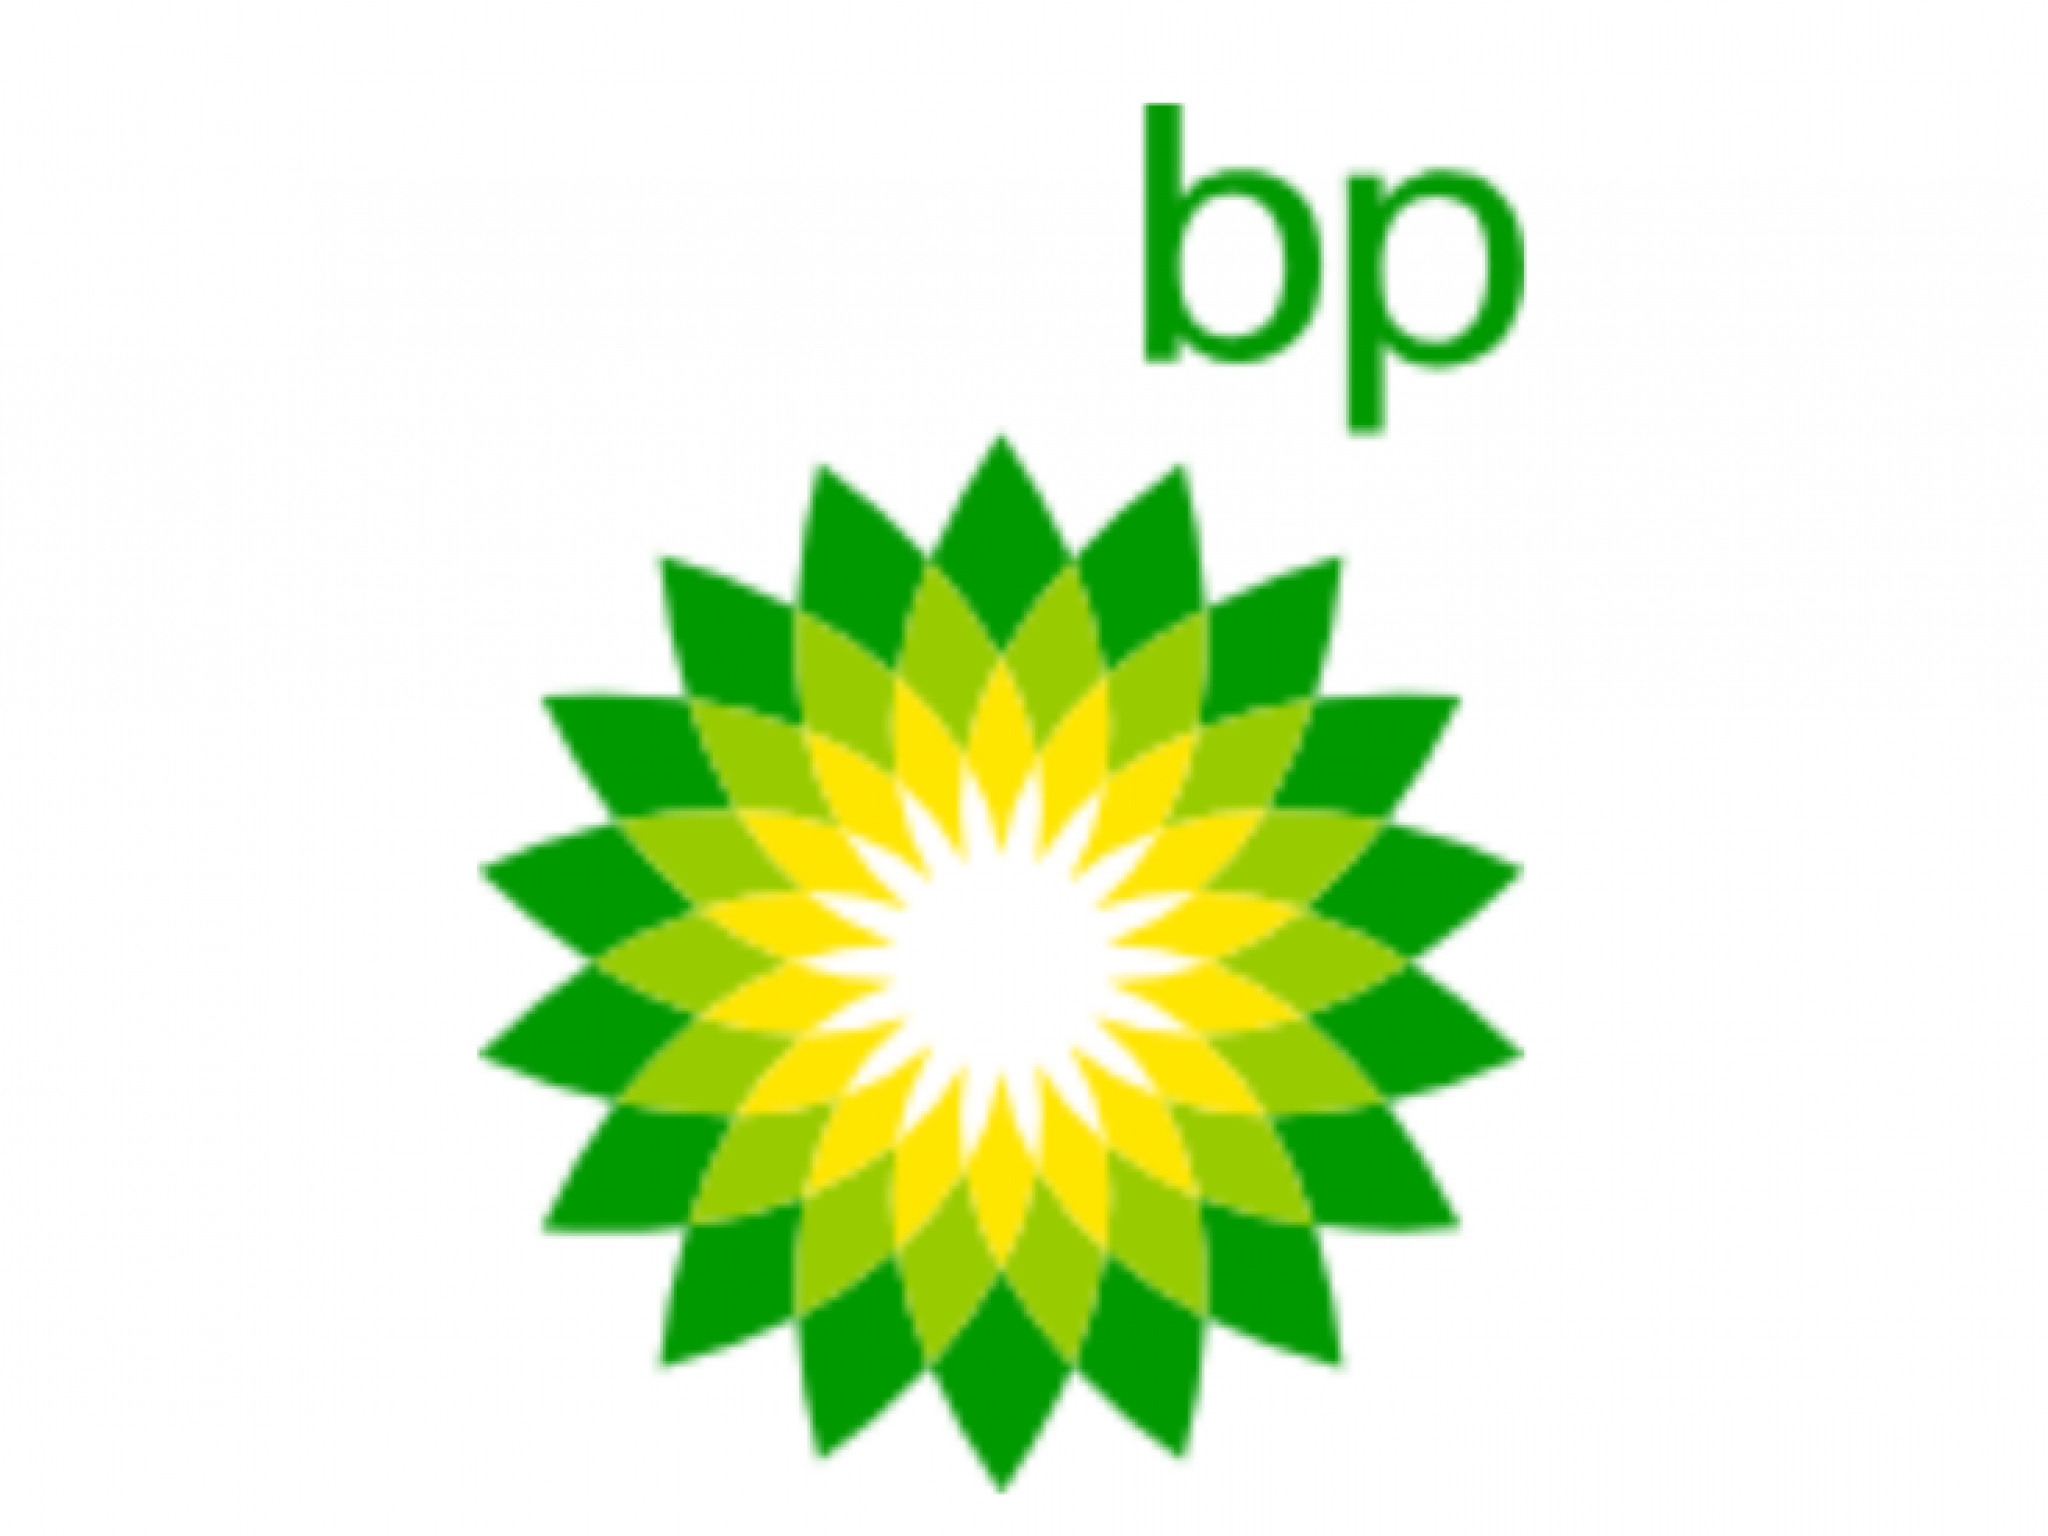  whats-going-on-with-bp-shares-premarket-friday 